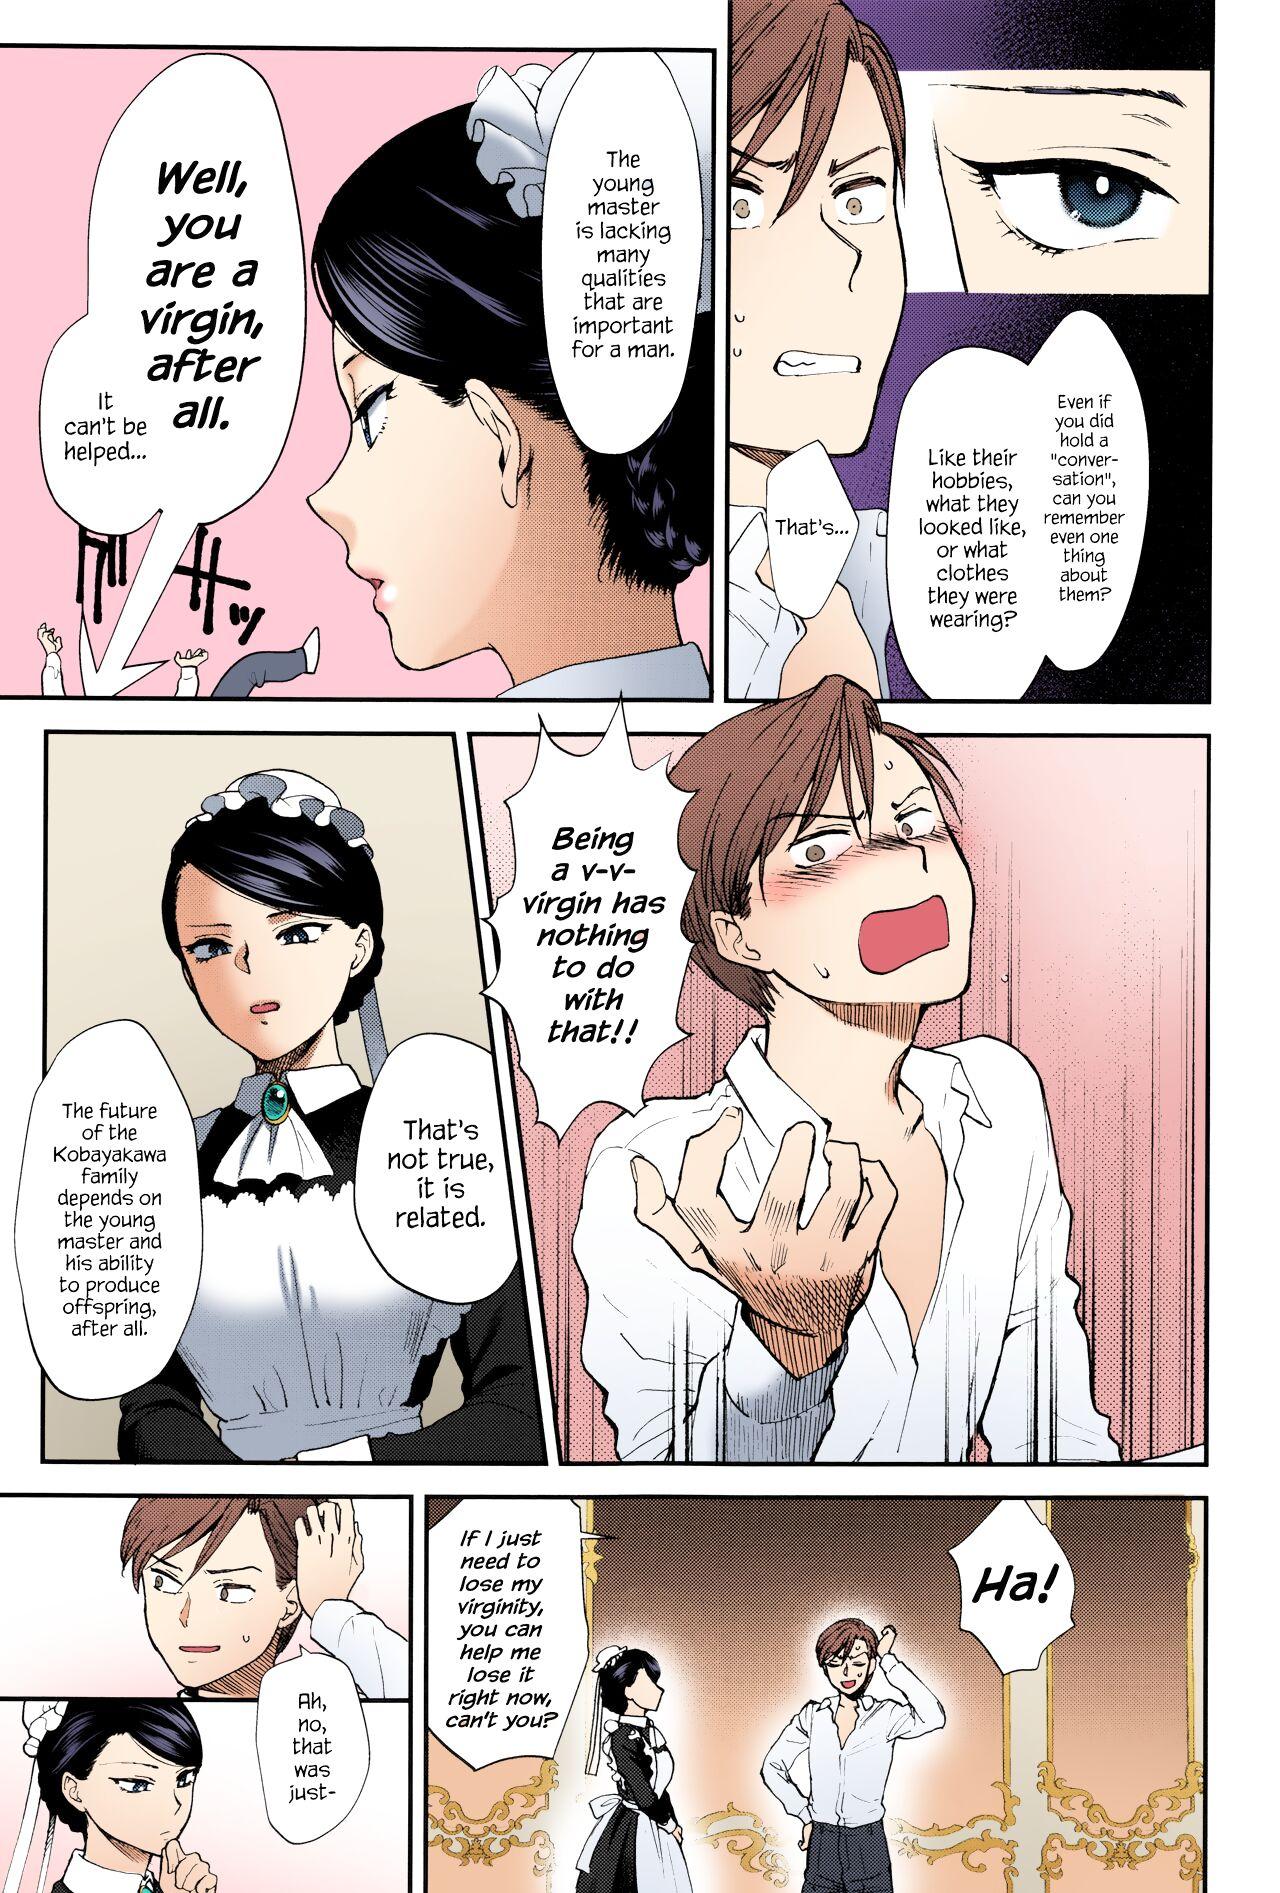 Chudai Kyoudou Well Maid - The Well “Maid” Instructor - Original Thuylinh - Page 5